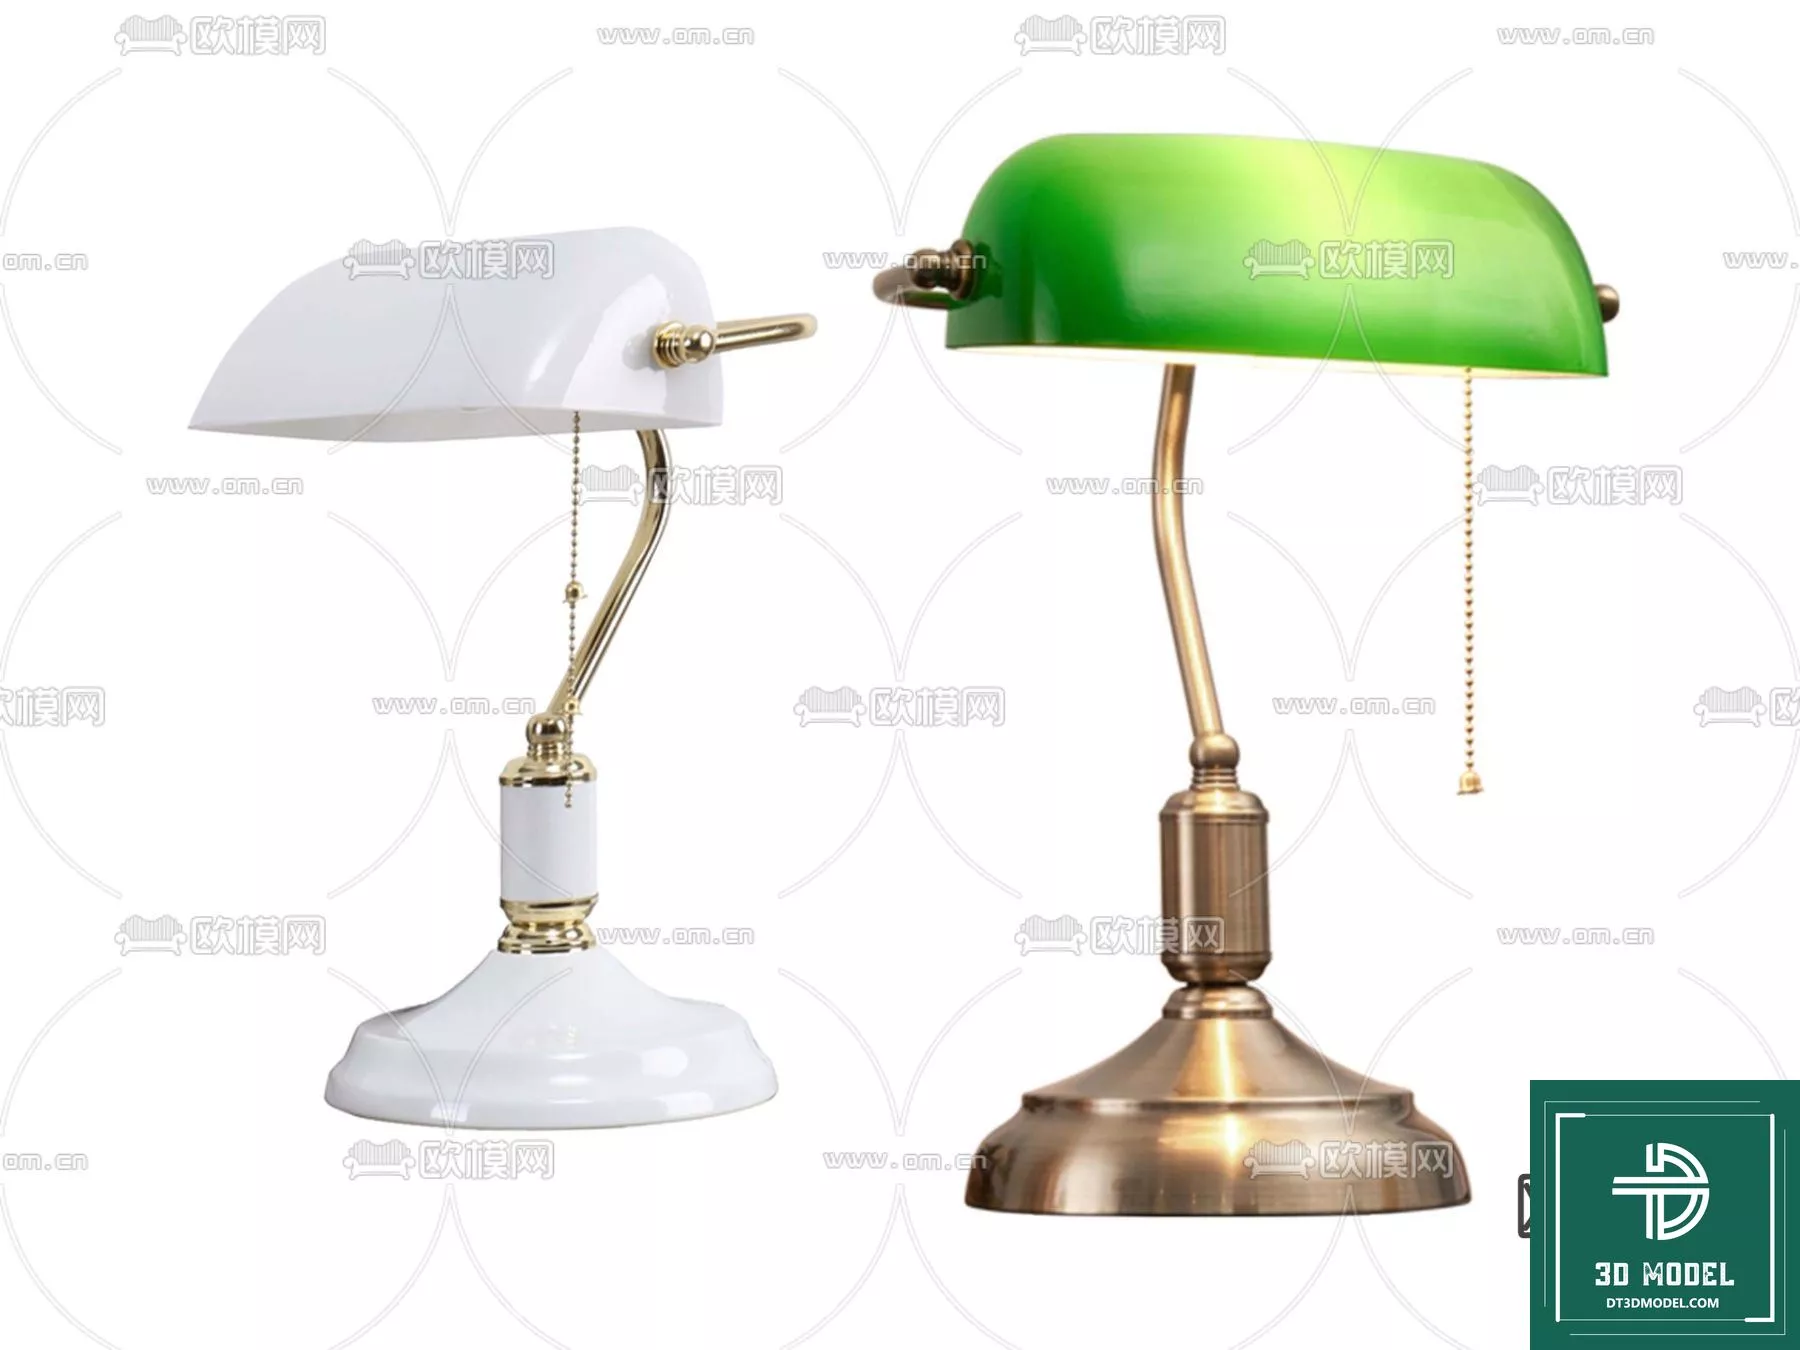 MODERN TABLE LAMP - SKETCHUP 3D MODEL - VRAY OR ENSCAPE - ID14489